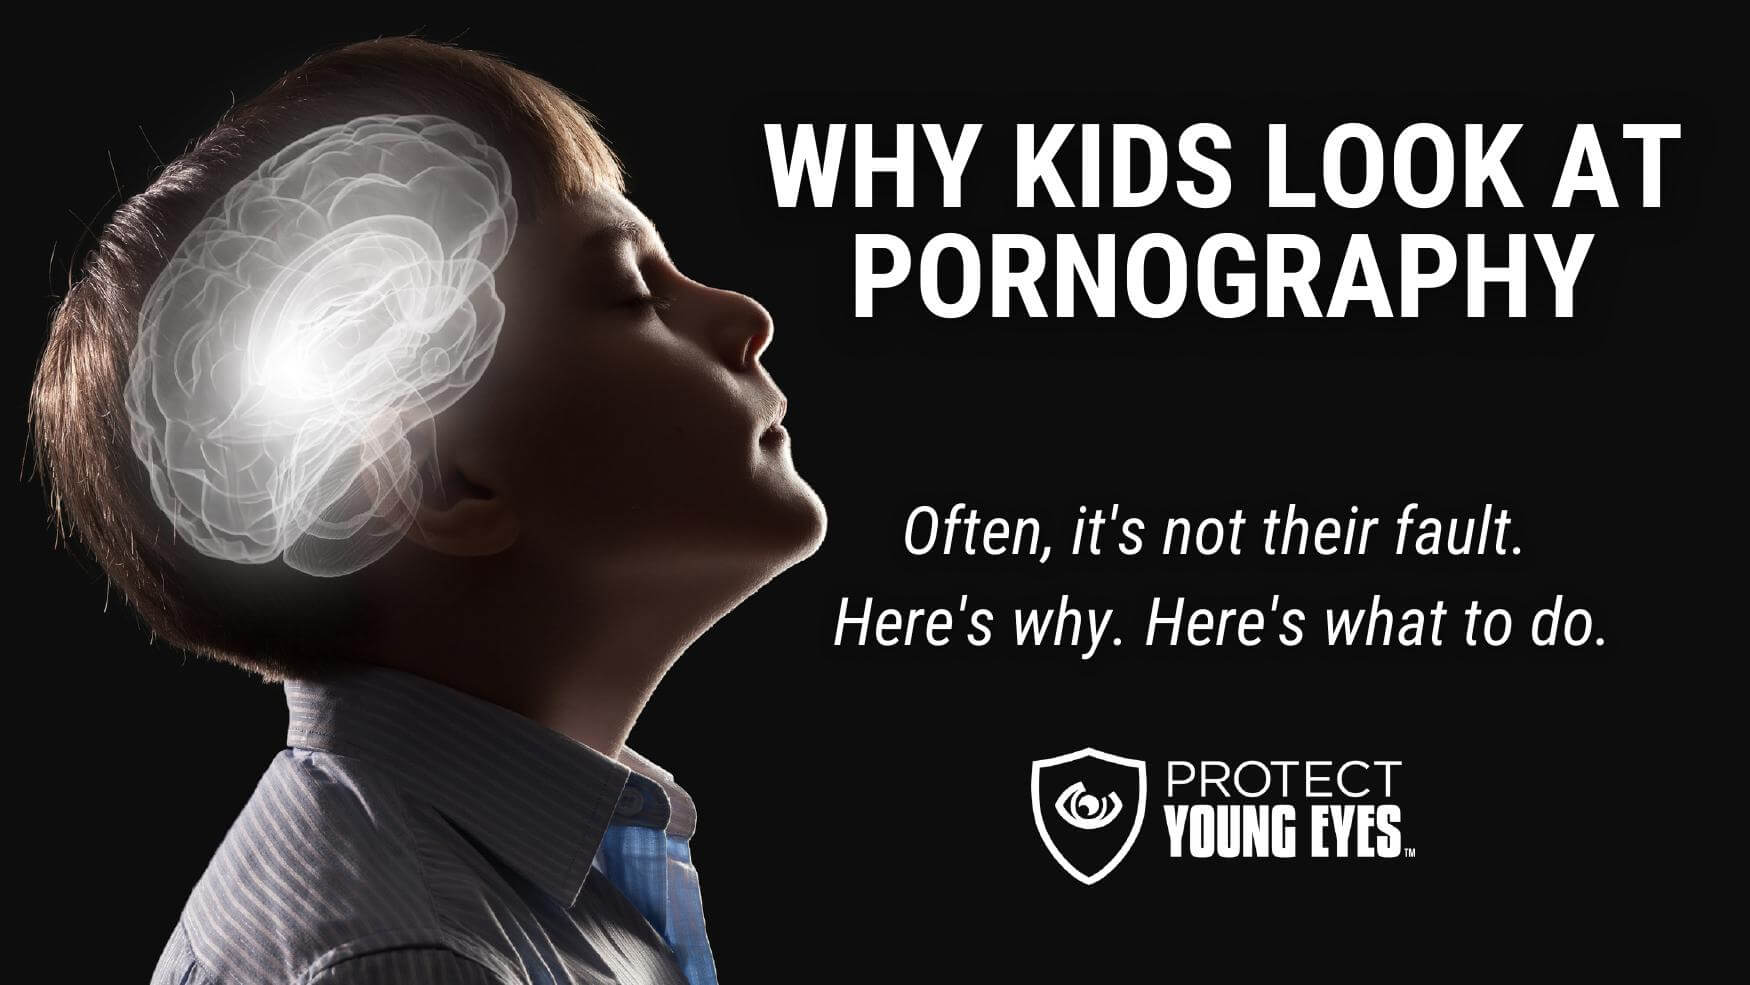 Xxx Video 12 Eyar - Why Kids Look at Pornography (It's not their fault) - Protect Young Eyes